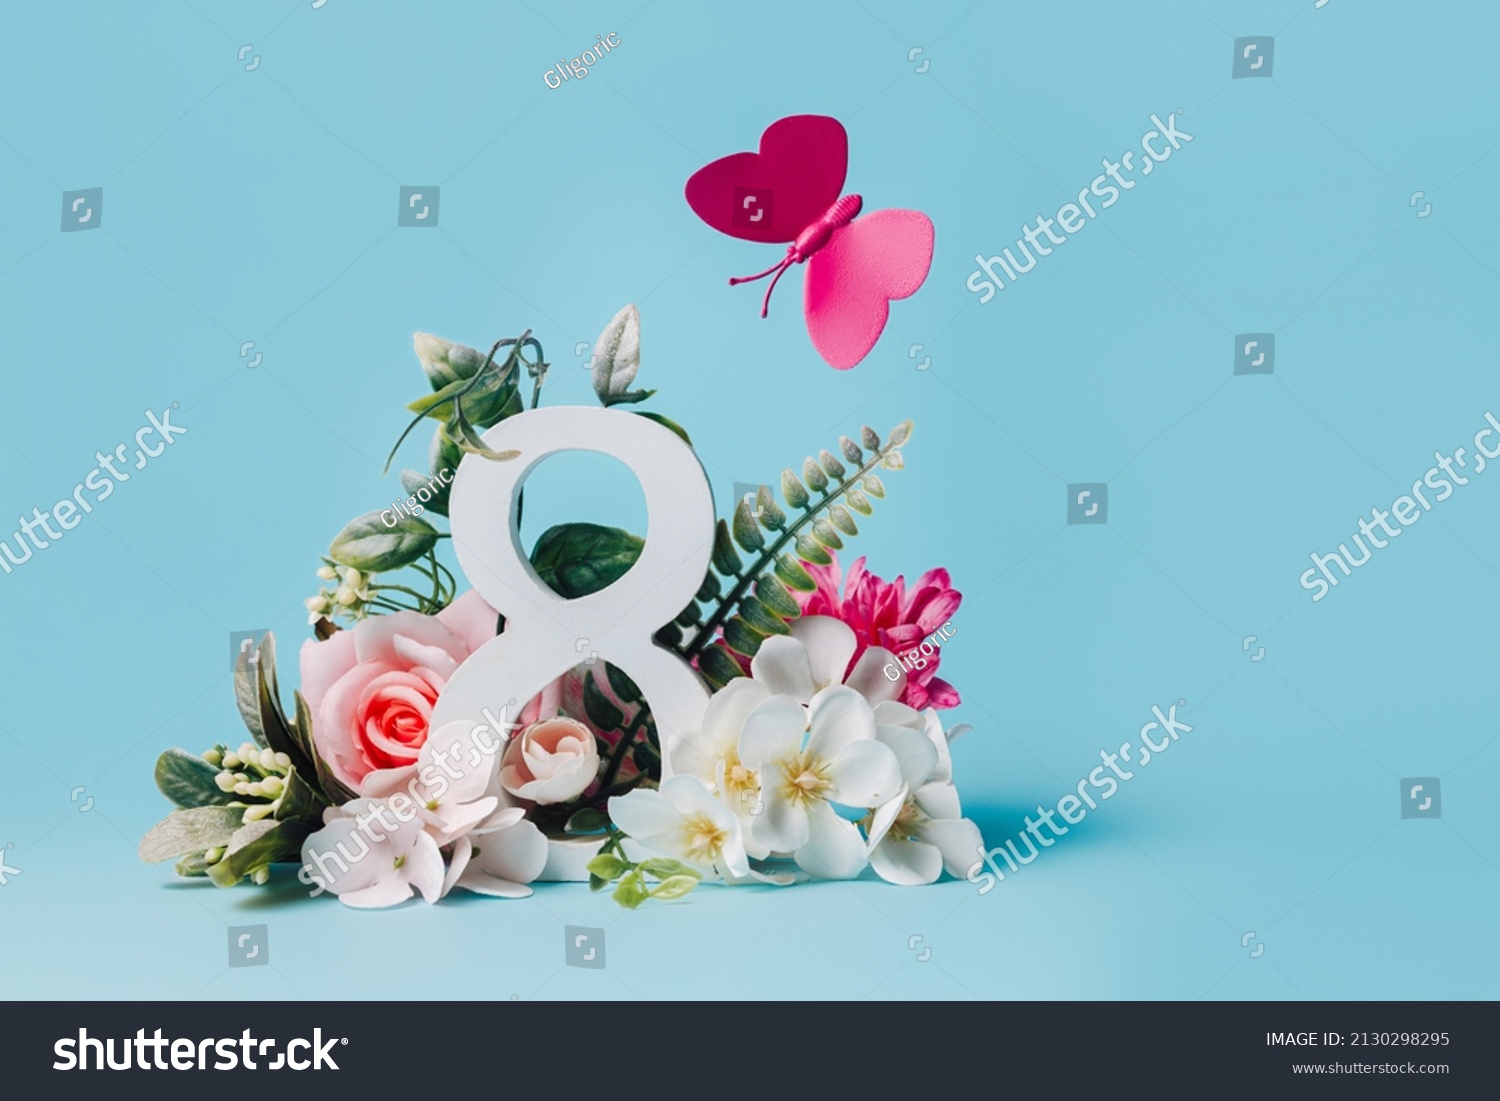 March 8th composition with number and flying butterfly and flowers against pastel blue background. Natural greeting banner for International Women's Day. Creative Mother's day floral concept. #2130298295